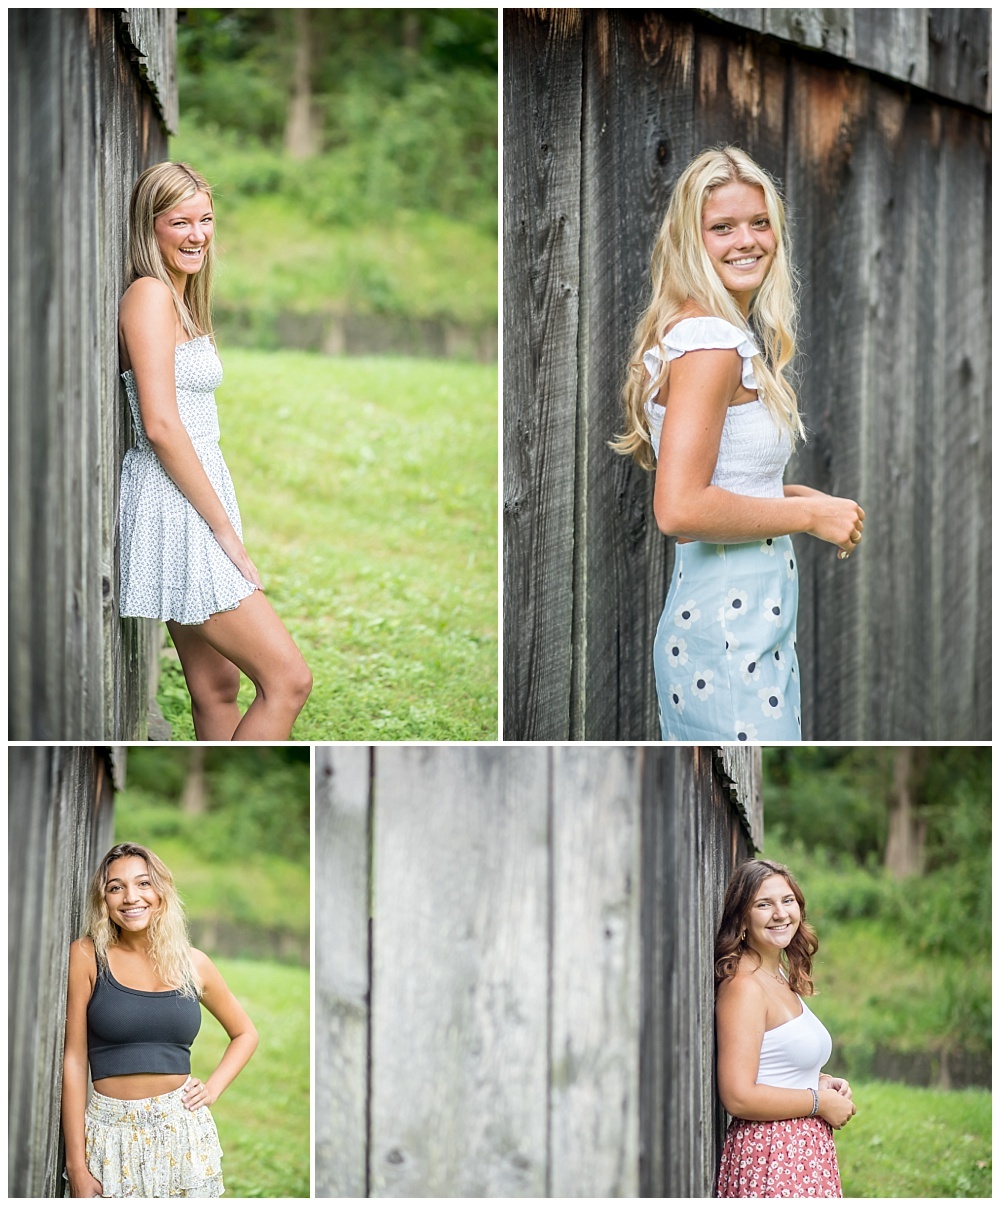 Silver Orchid Photography, Silver Orchid Portraits, Summer Session, Senior Pictures, Senior Portraits, Class of 2021, Graduating Senior